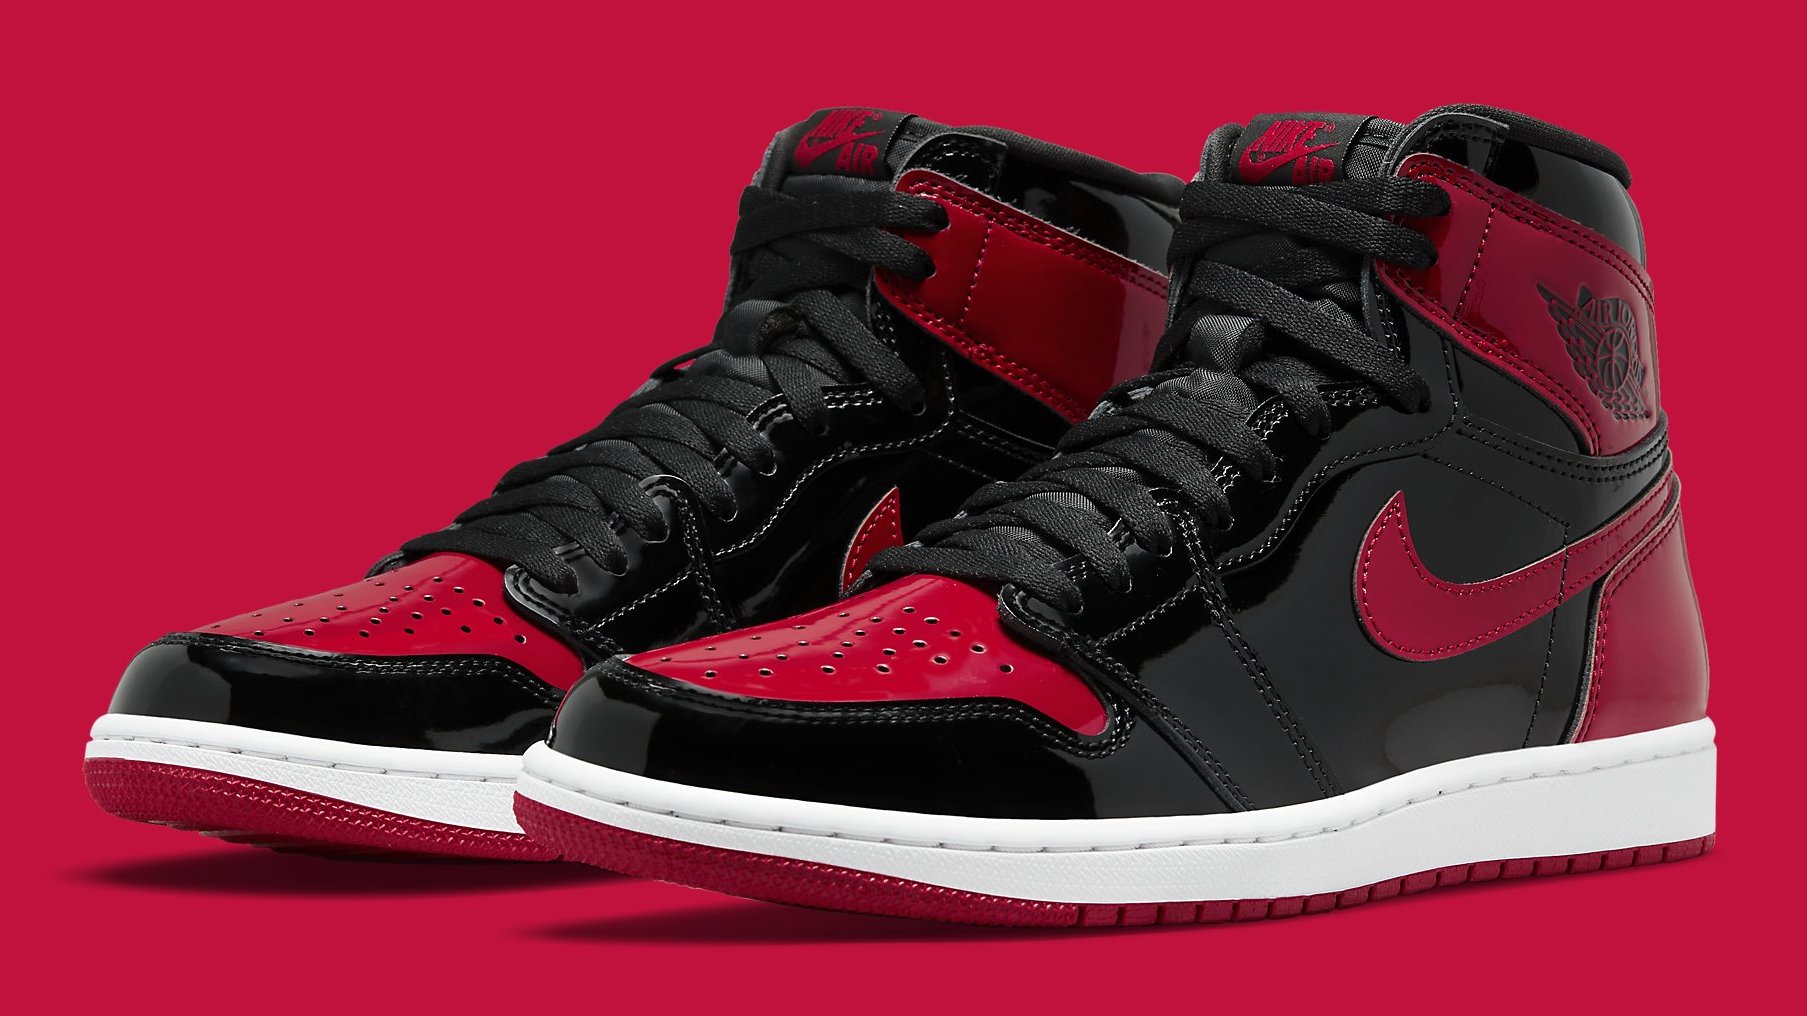 Patent Leather 'Bred' Air Jordan 1s to Release This December